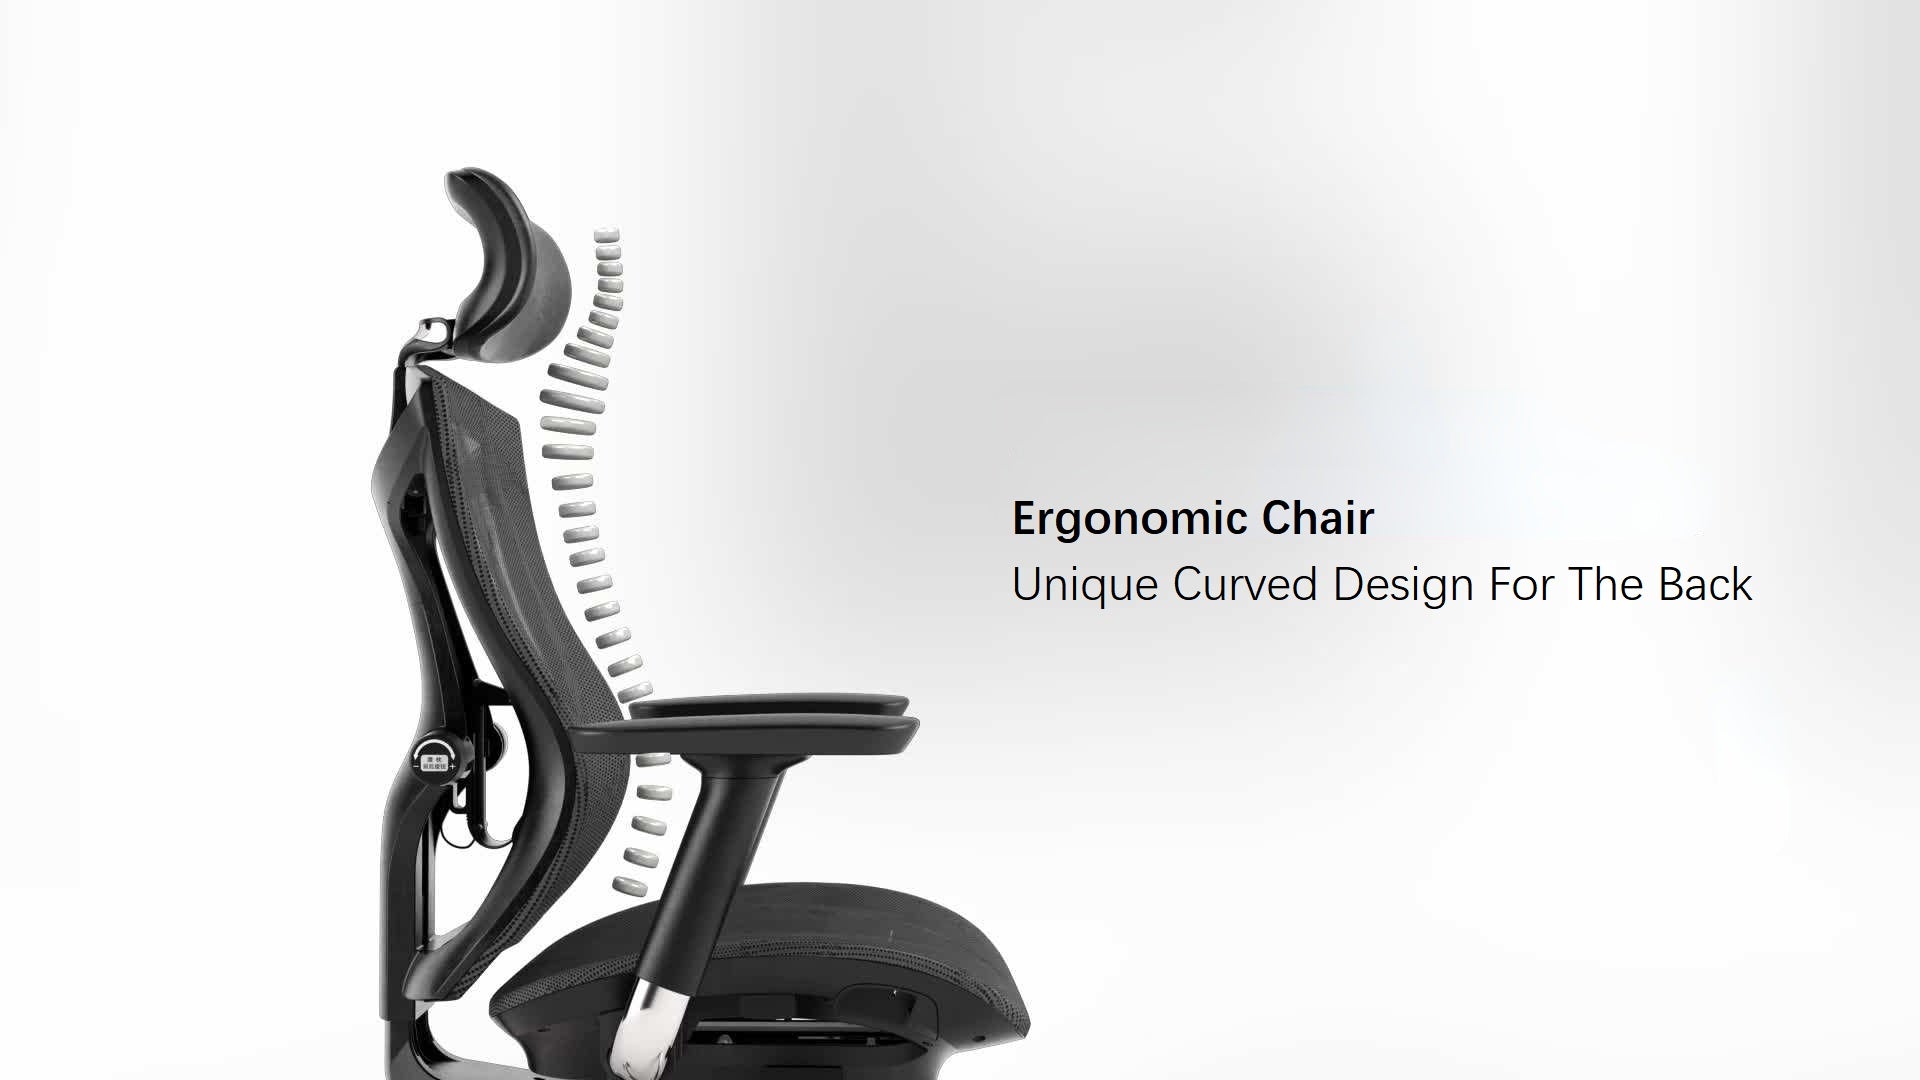 Why-is-an-ergonomic-chair-good-for-back-support OdinLake